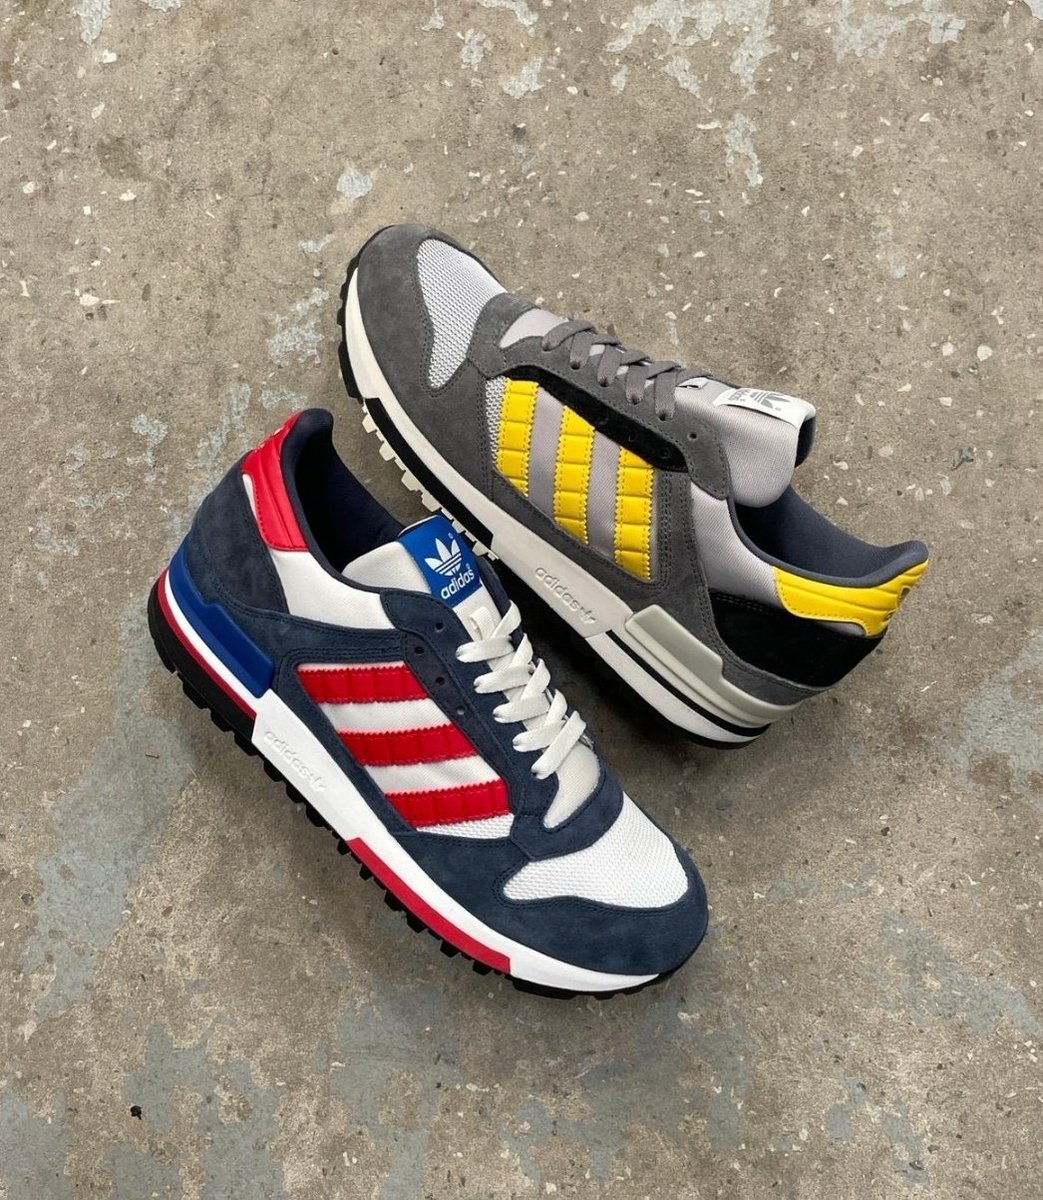 Upcoming

adidas ZX 600

In the original colourway, as well as the original ZX 700 colourway

Details of launch dates and price to be announced

📸 - @sizeofficial 

#adiFamily #3stripes2soles1love